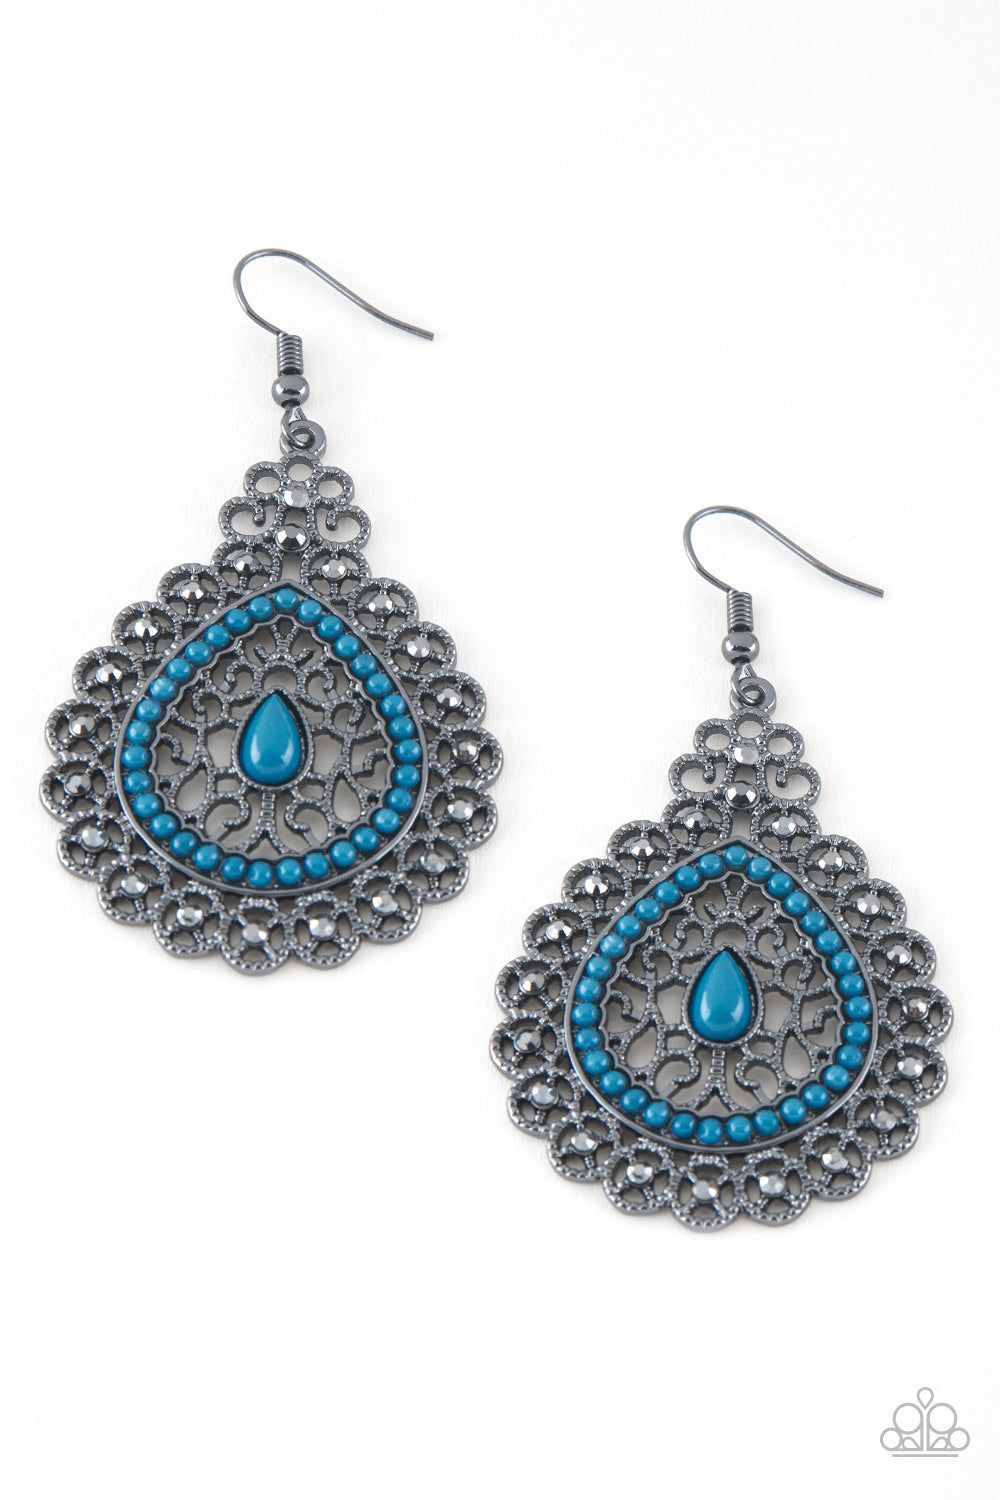 Paparazzi Accessories Carnival Courtesan - Blue Earrings - Lady T Accessories